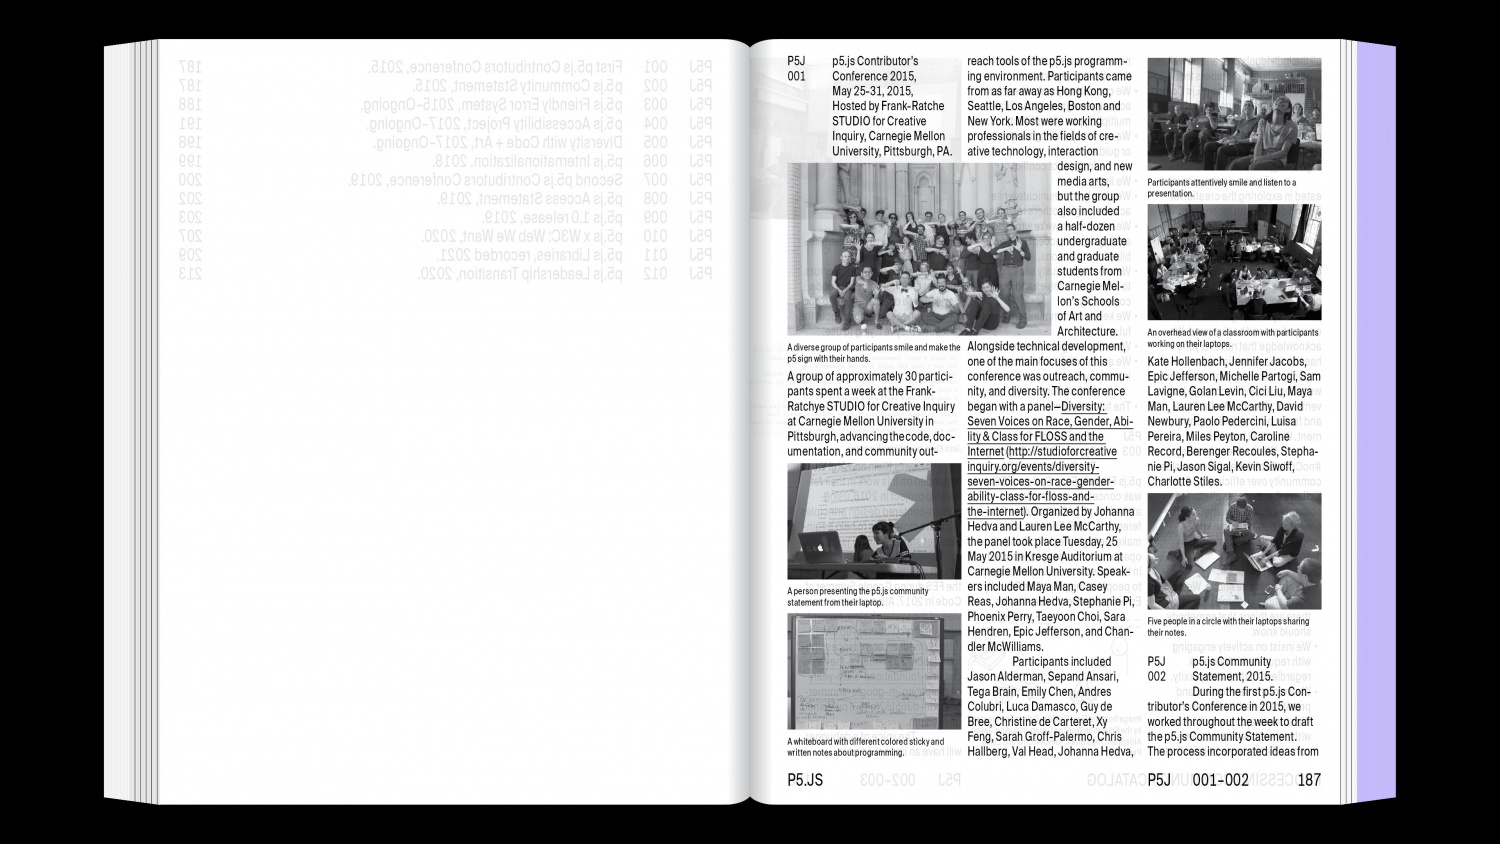 spread from catalog featuring p5.js contributors conference